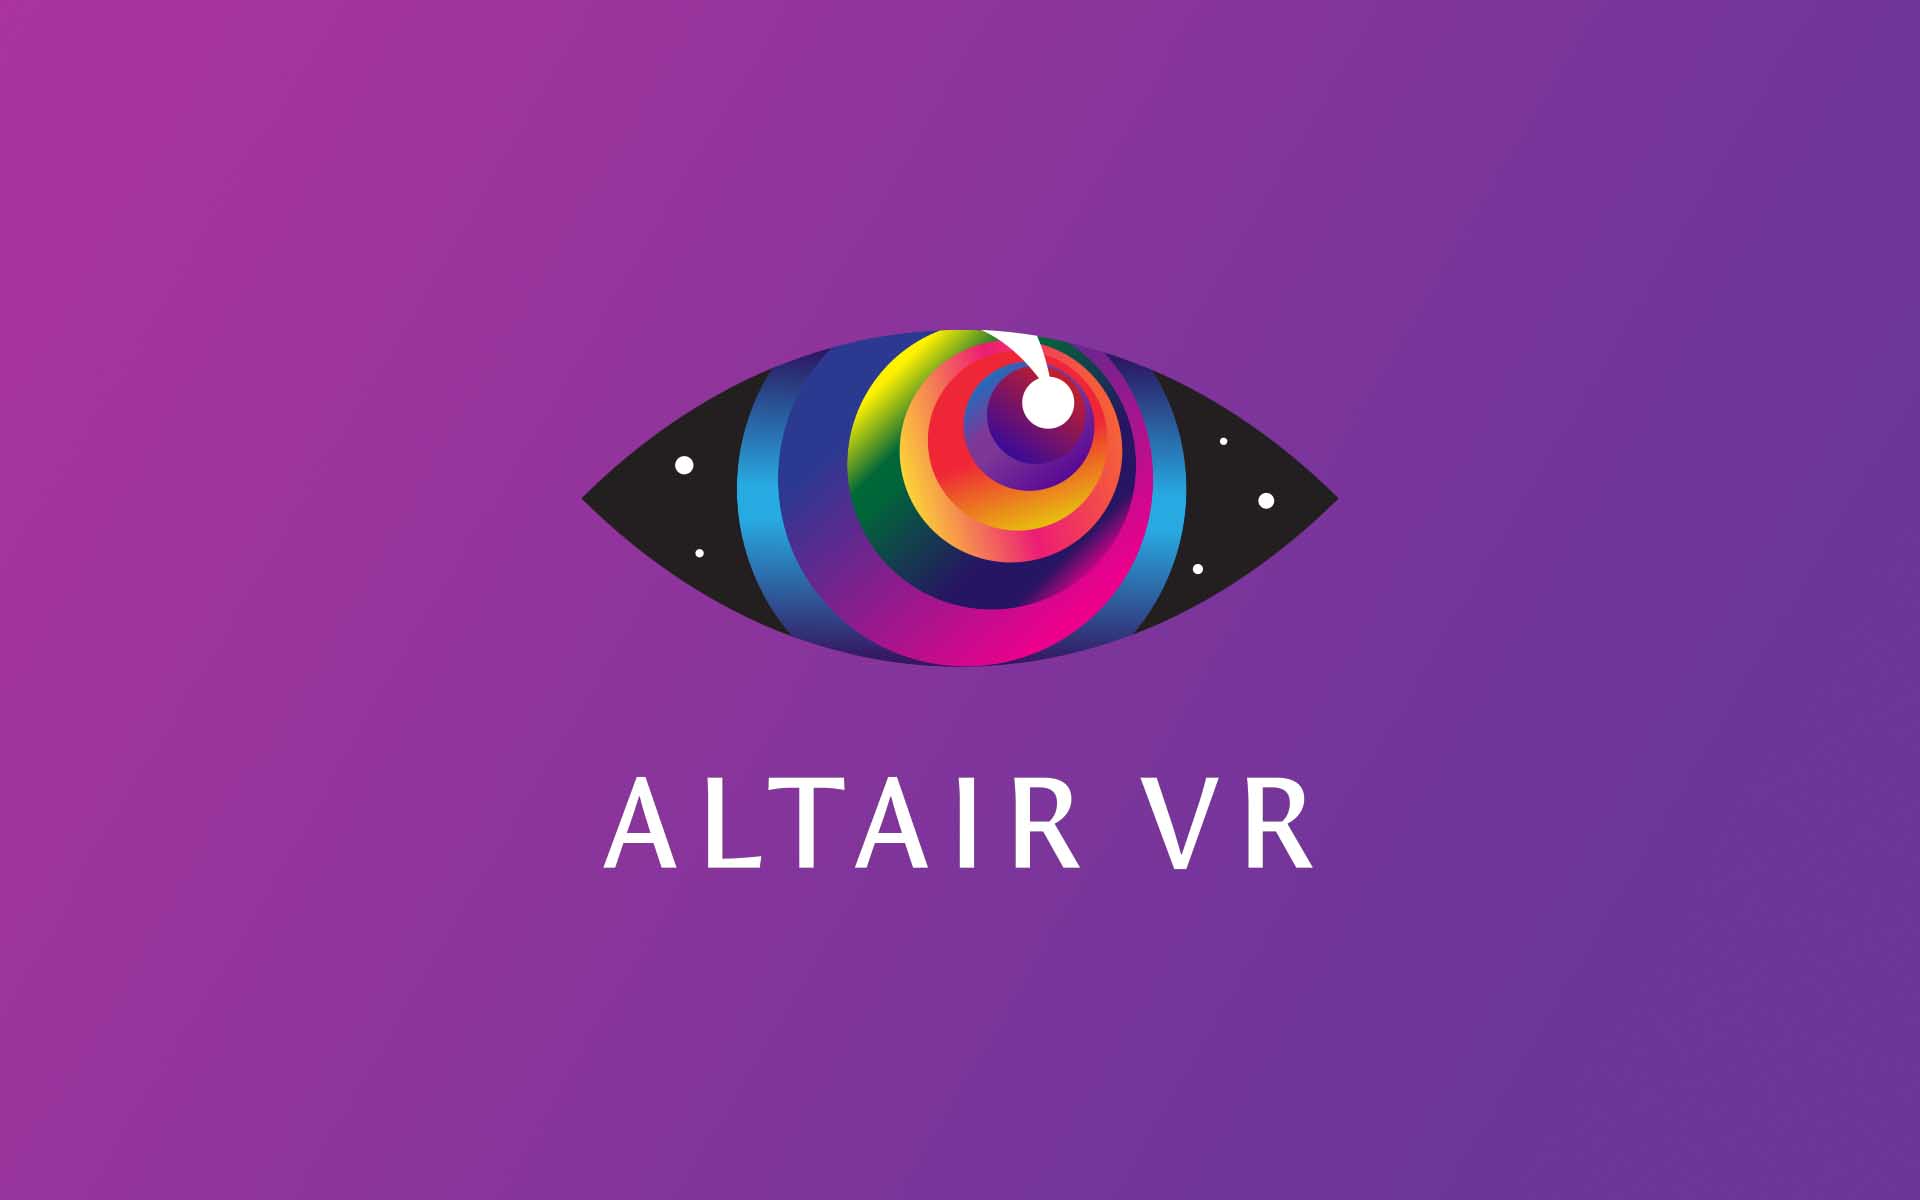 ALTAIR VR Predicts $535 Million in Revenue Over 3 Years